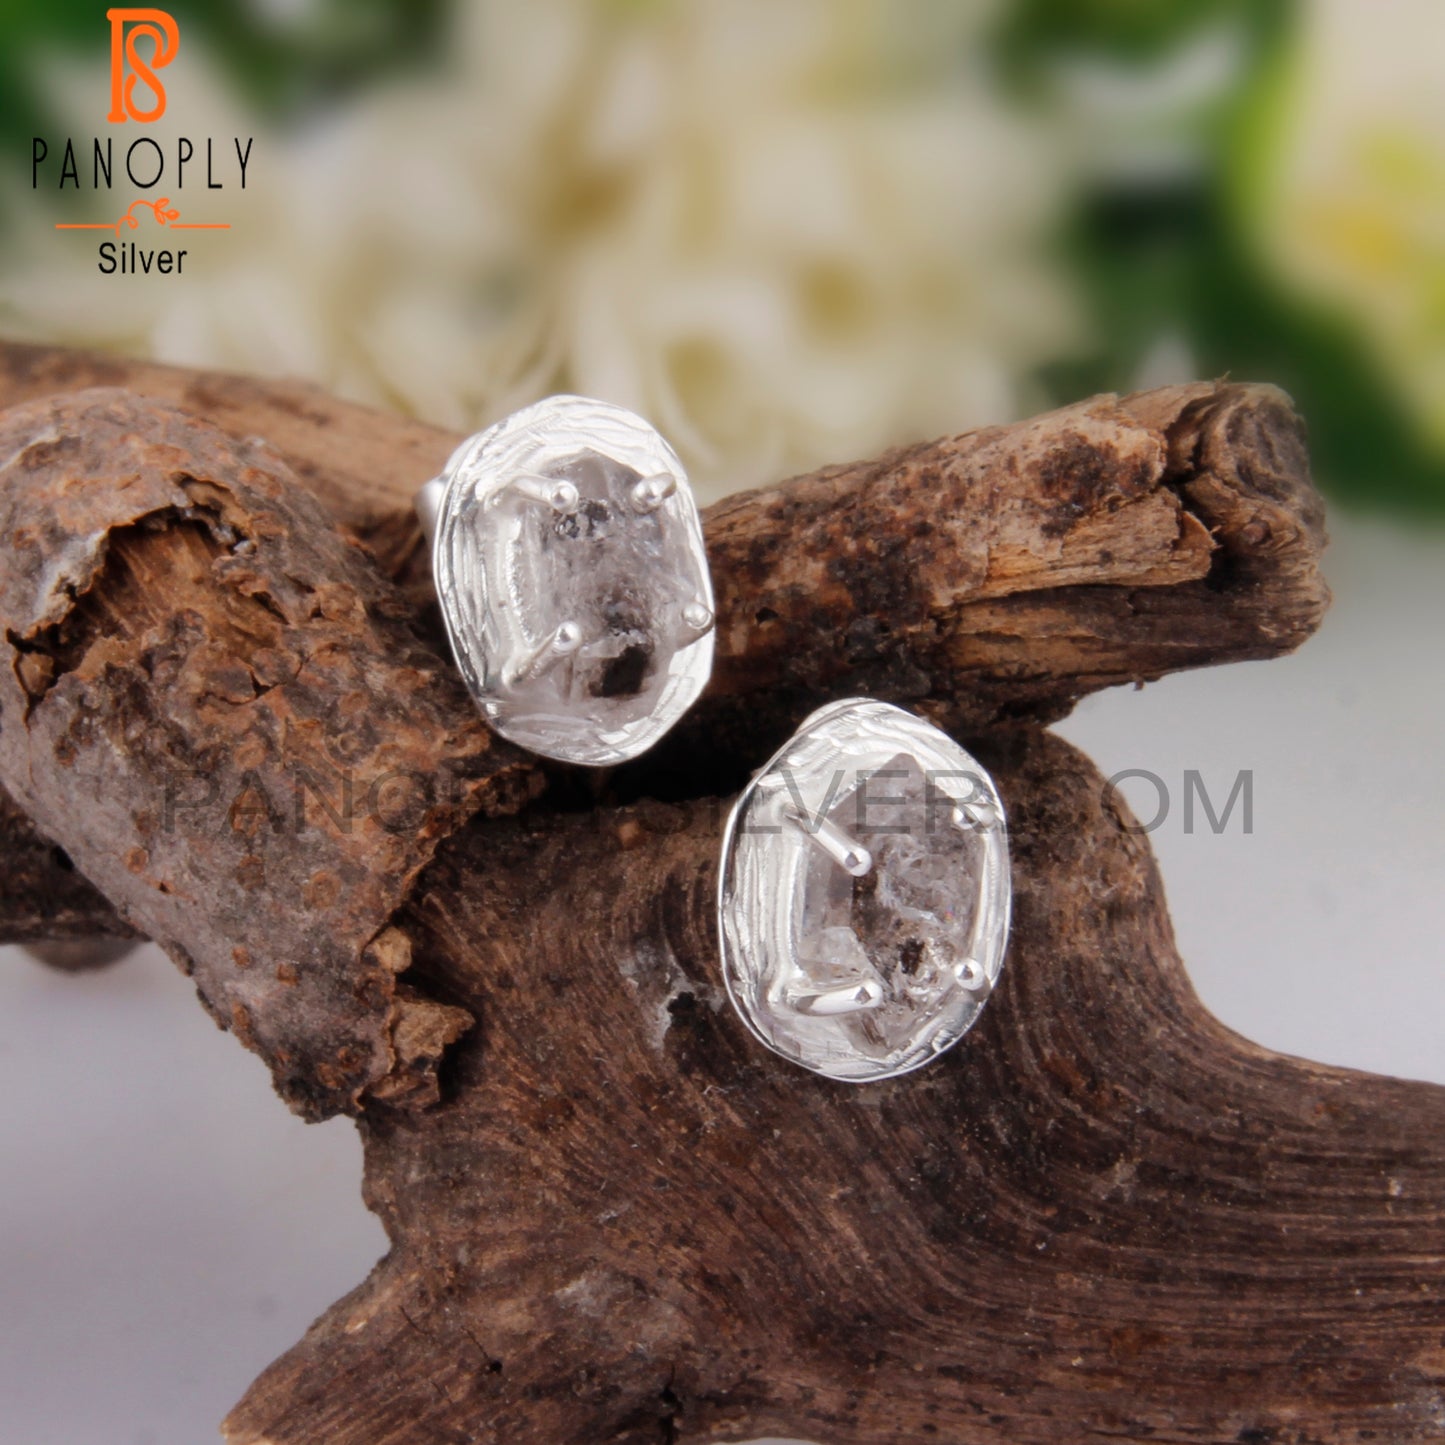 Natural Unique Herkimer Diamond 925 Silver Earrings